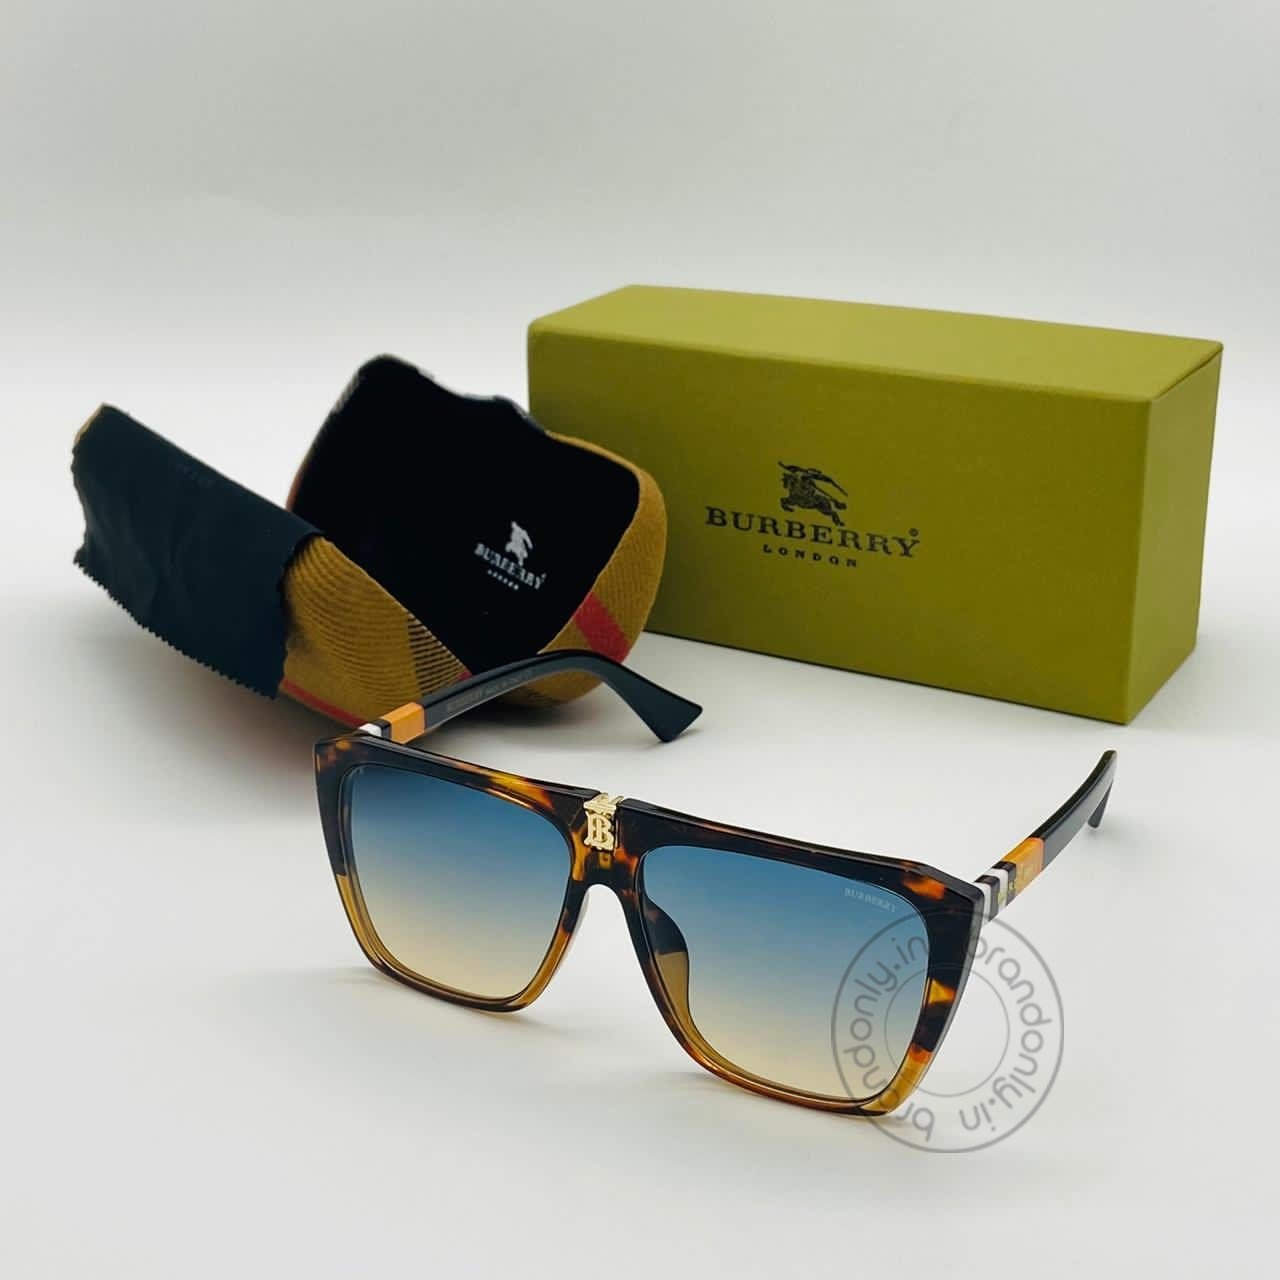 Burberry Branded Multi Color Blue & Yellow Glass Men's Sunglass For Man BB-105 Square Cheetha Frame Sunglass Gift